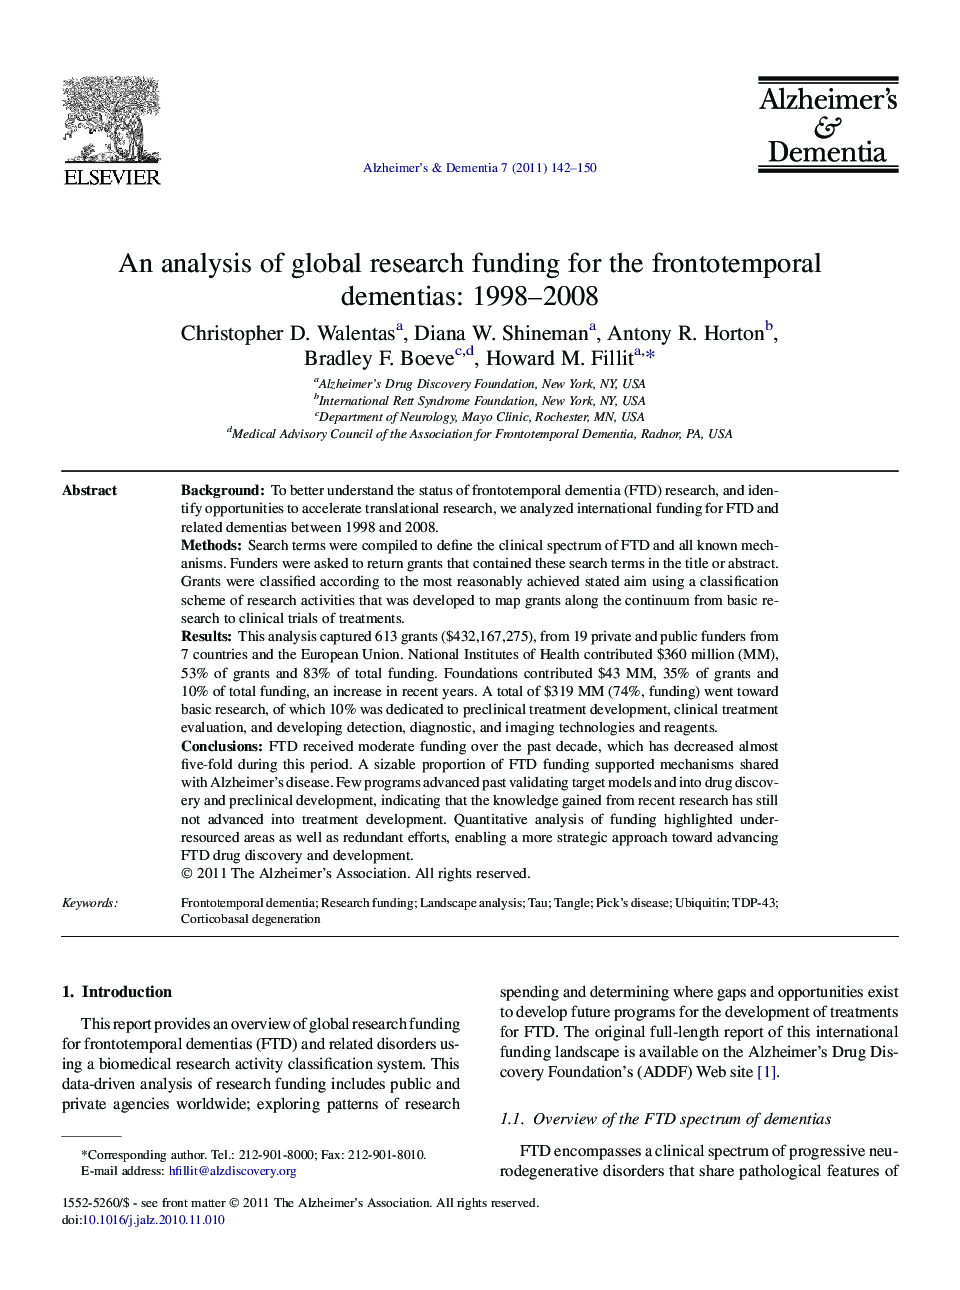 Featured ArticleAn analysis of global research funding for the frontotemporal dementias: 1998-2008